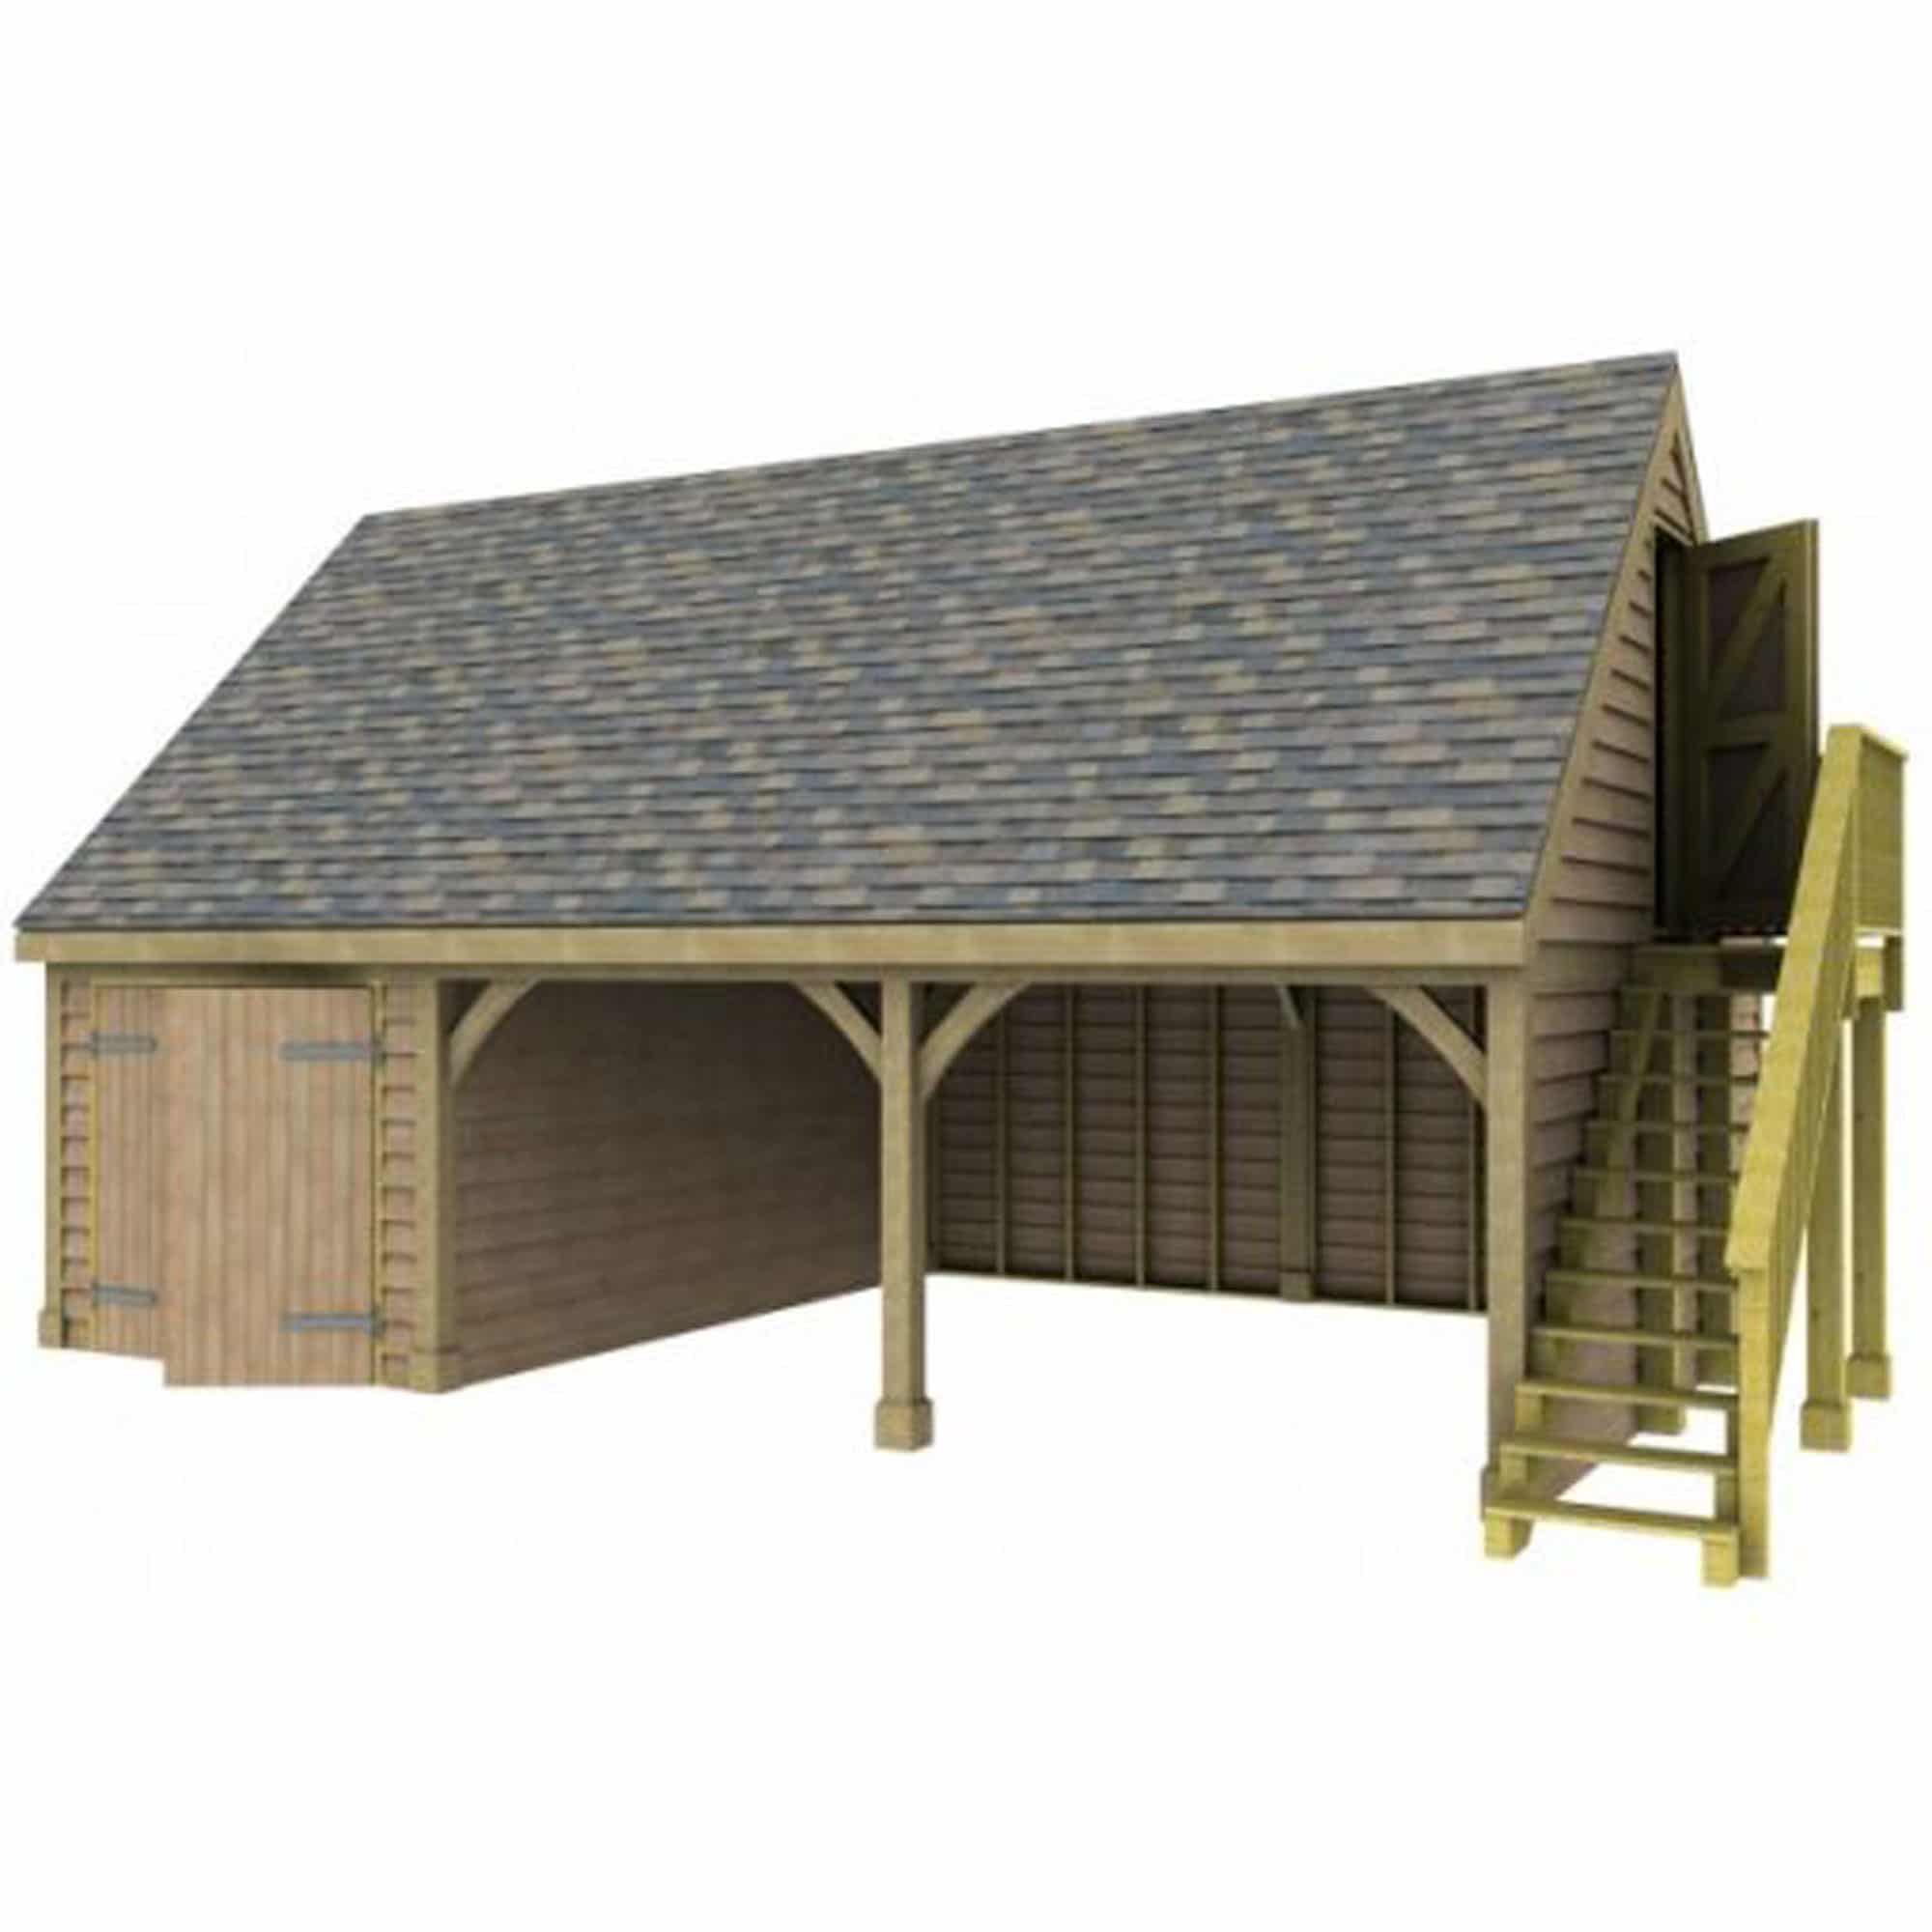 Traditional Double Bay Garages - Build It